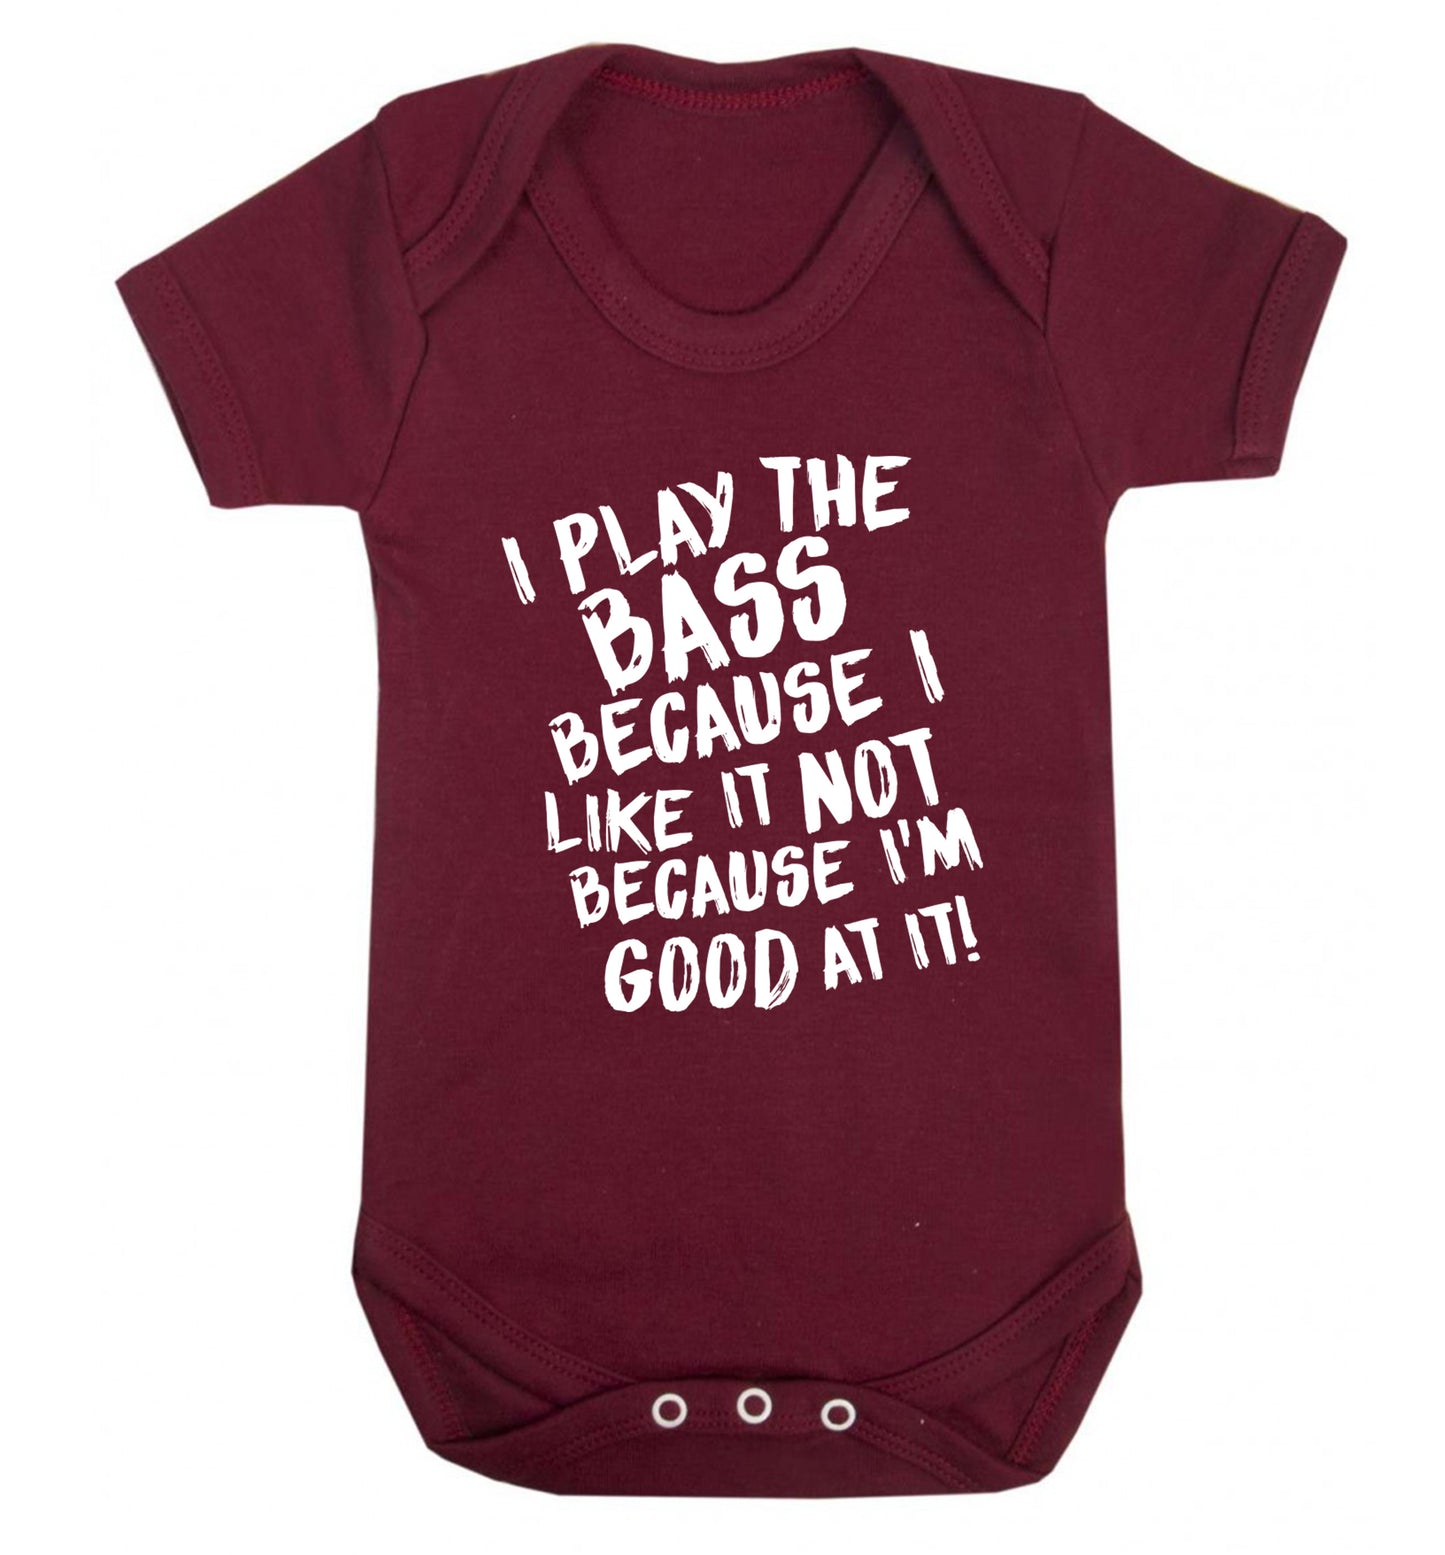 I play the bass because I like it not because I'm good at it Baby Vest maroon 18-24 months